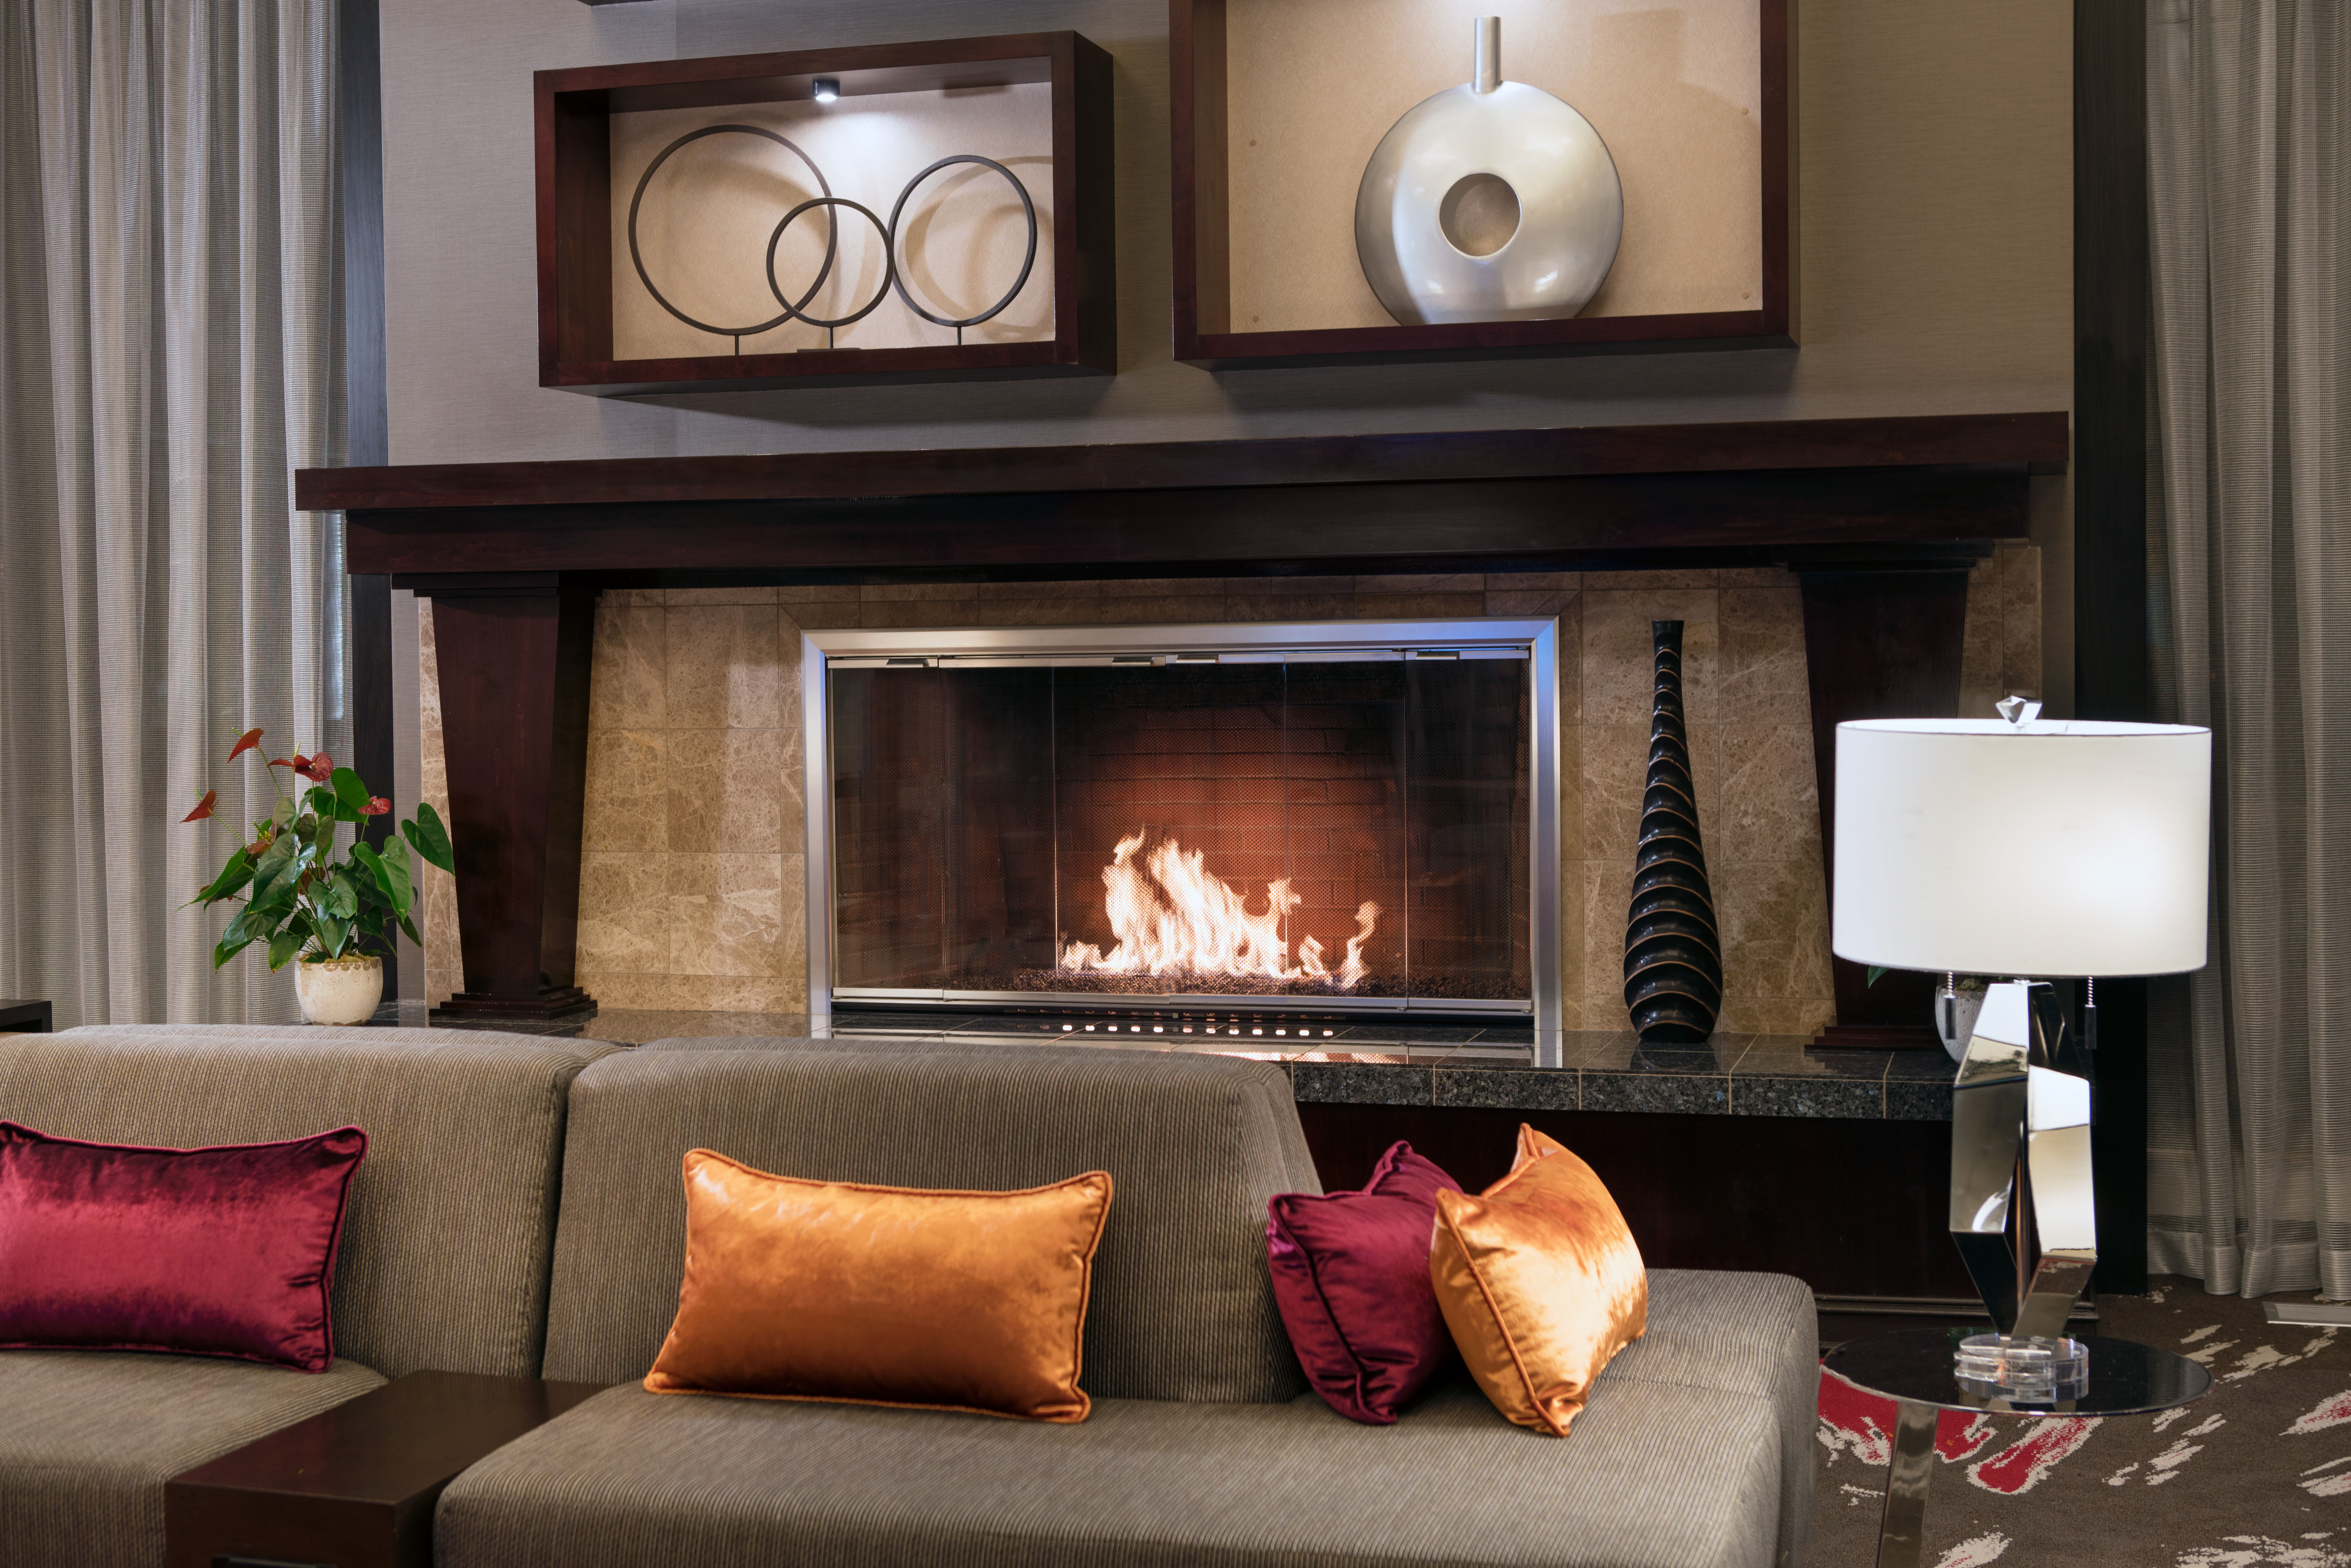 Lobby Seating With Fireplace